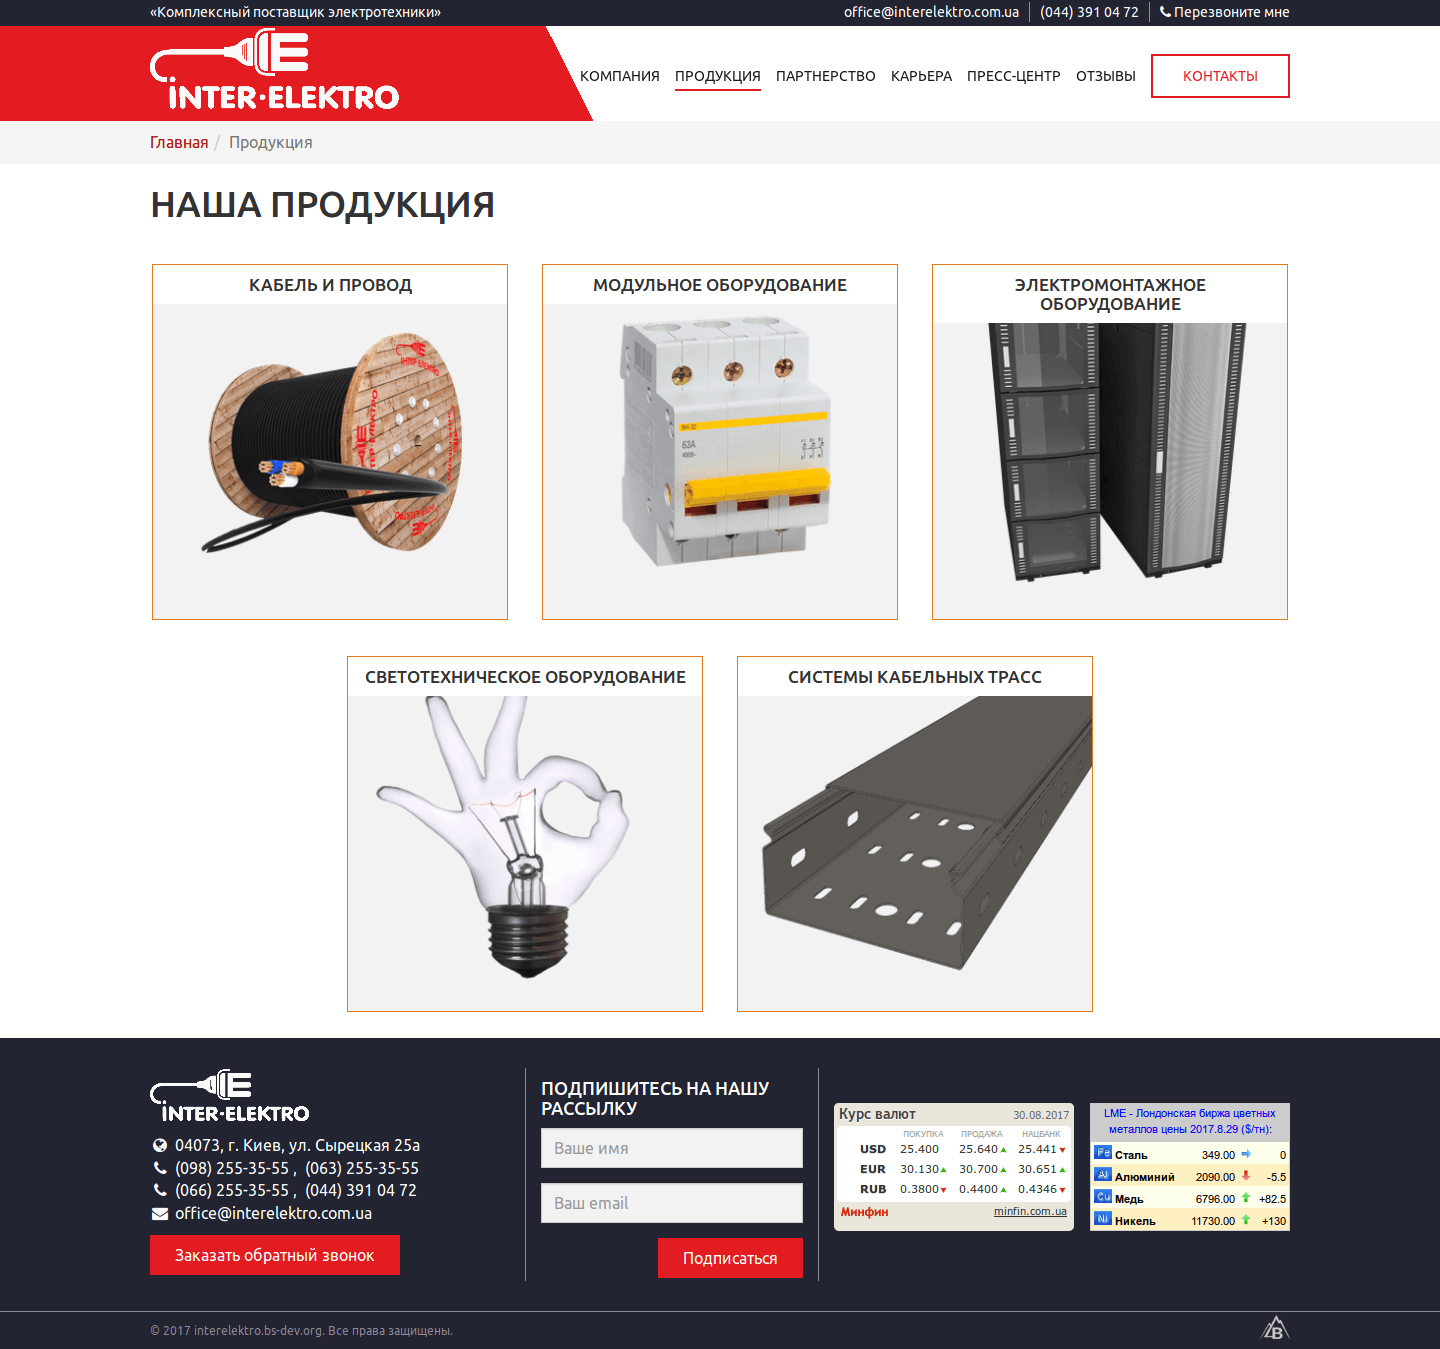 Page with the product catalog